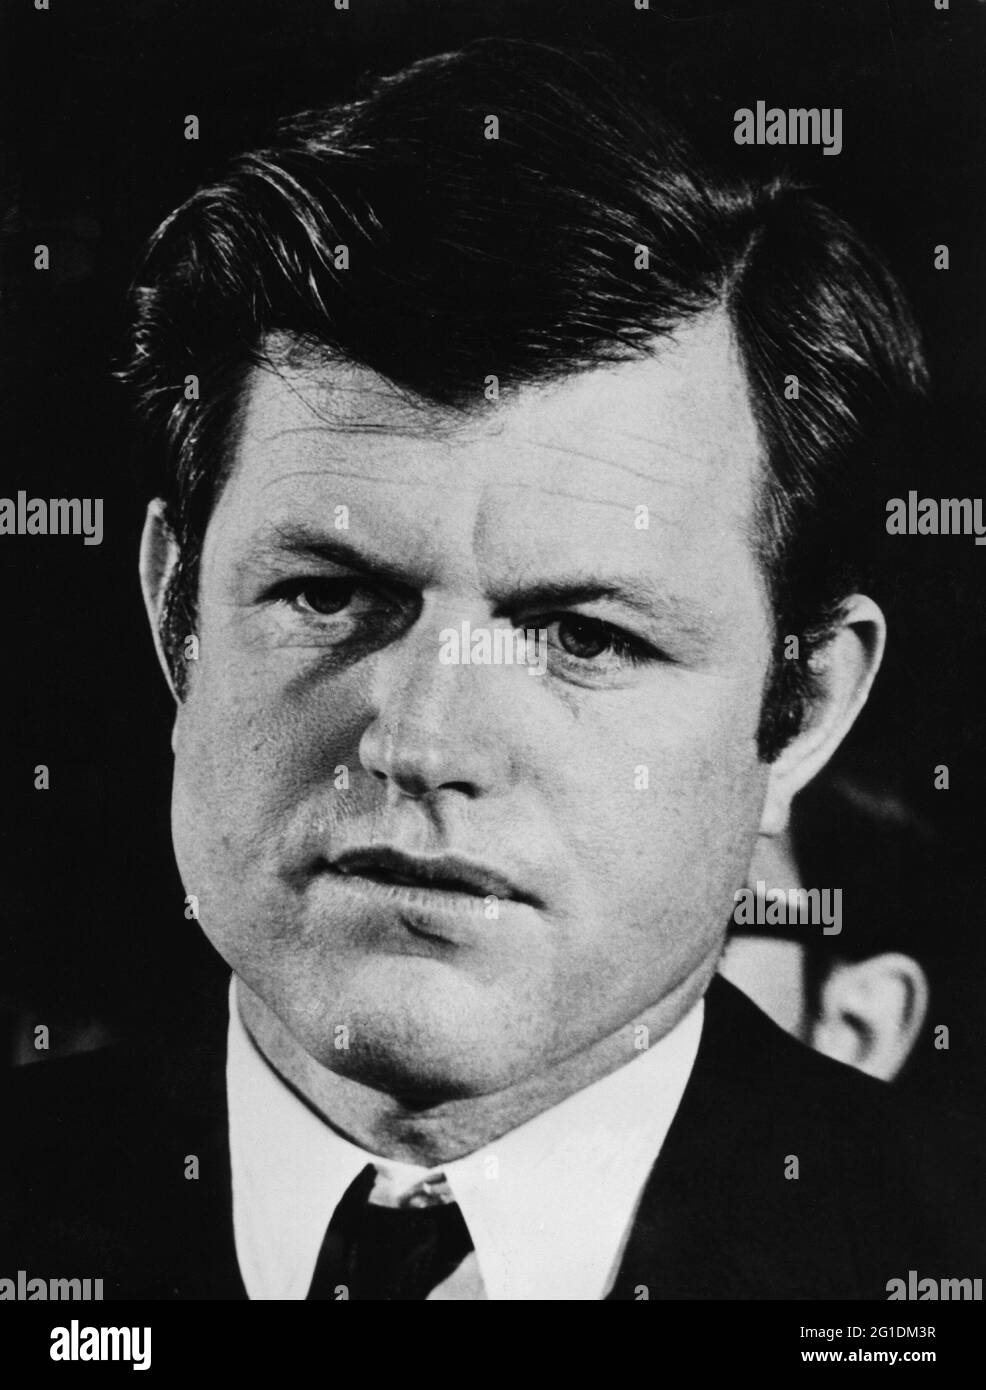 Kennedy, Edward Moore 'Ted',  22.2.1932 - 25.8.2009, American politician (Democratic), ADDITIONAL-RIGHTS-CLEARANCE-INFO-NOT-AVAILABLE Stock Photo